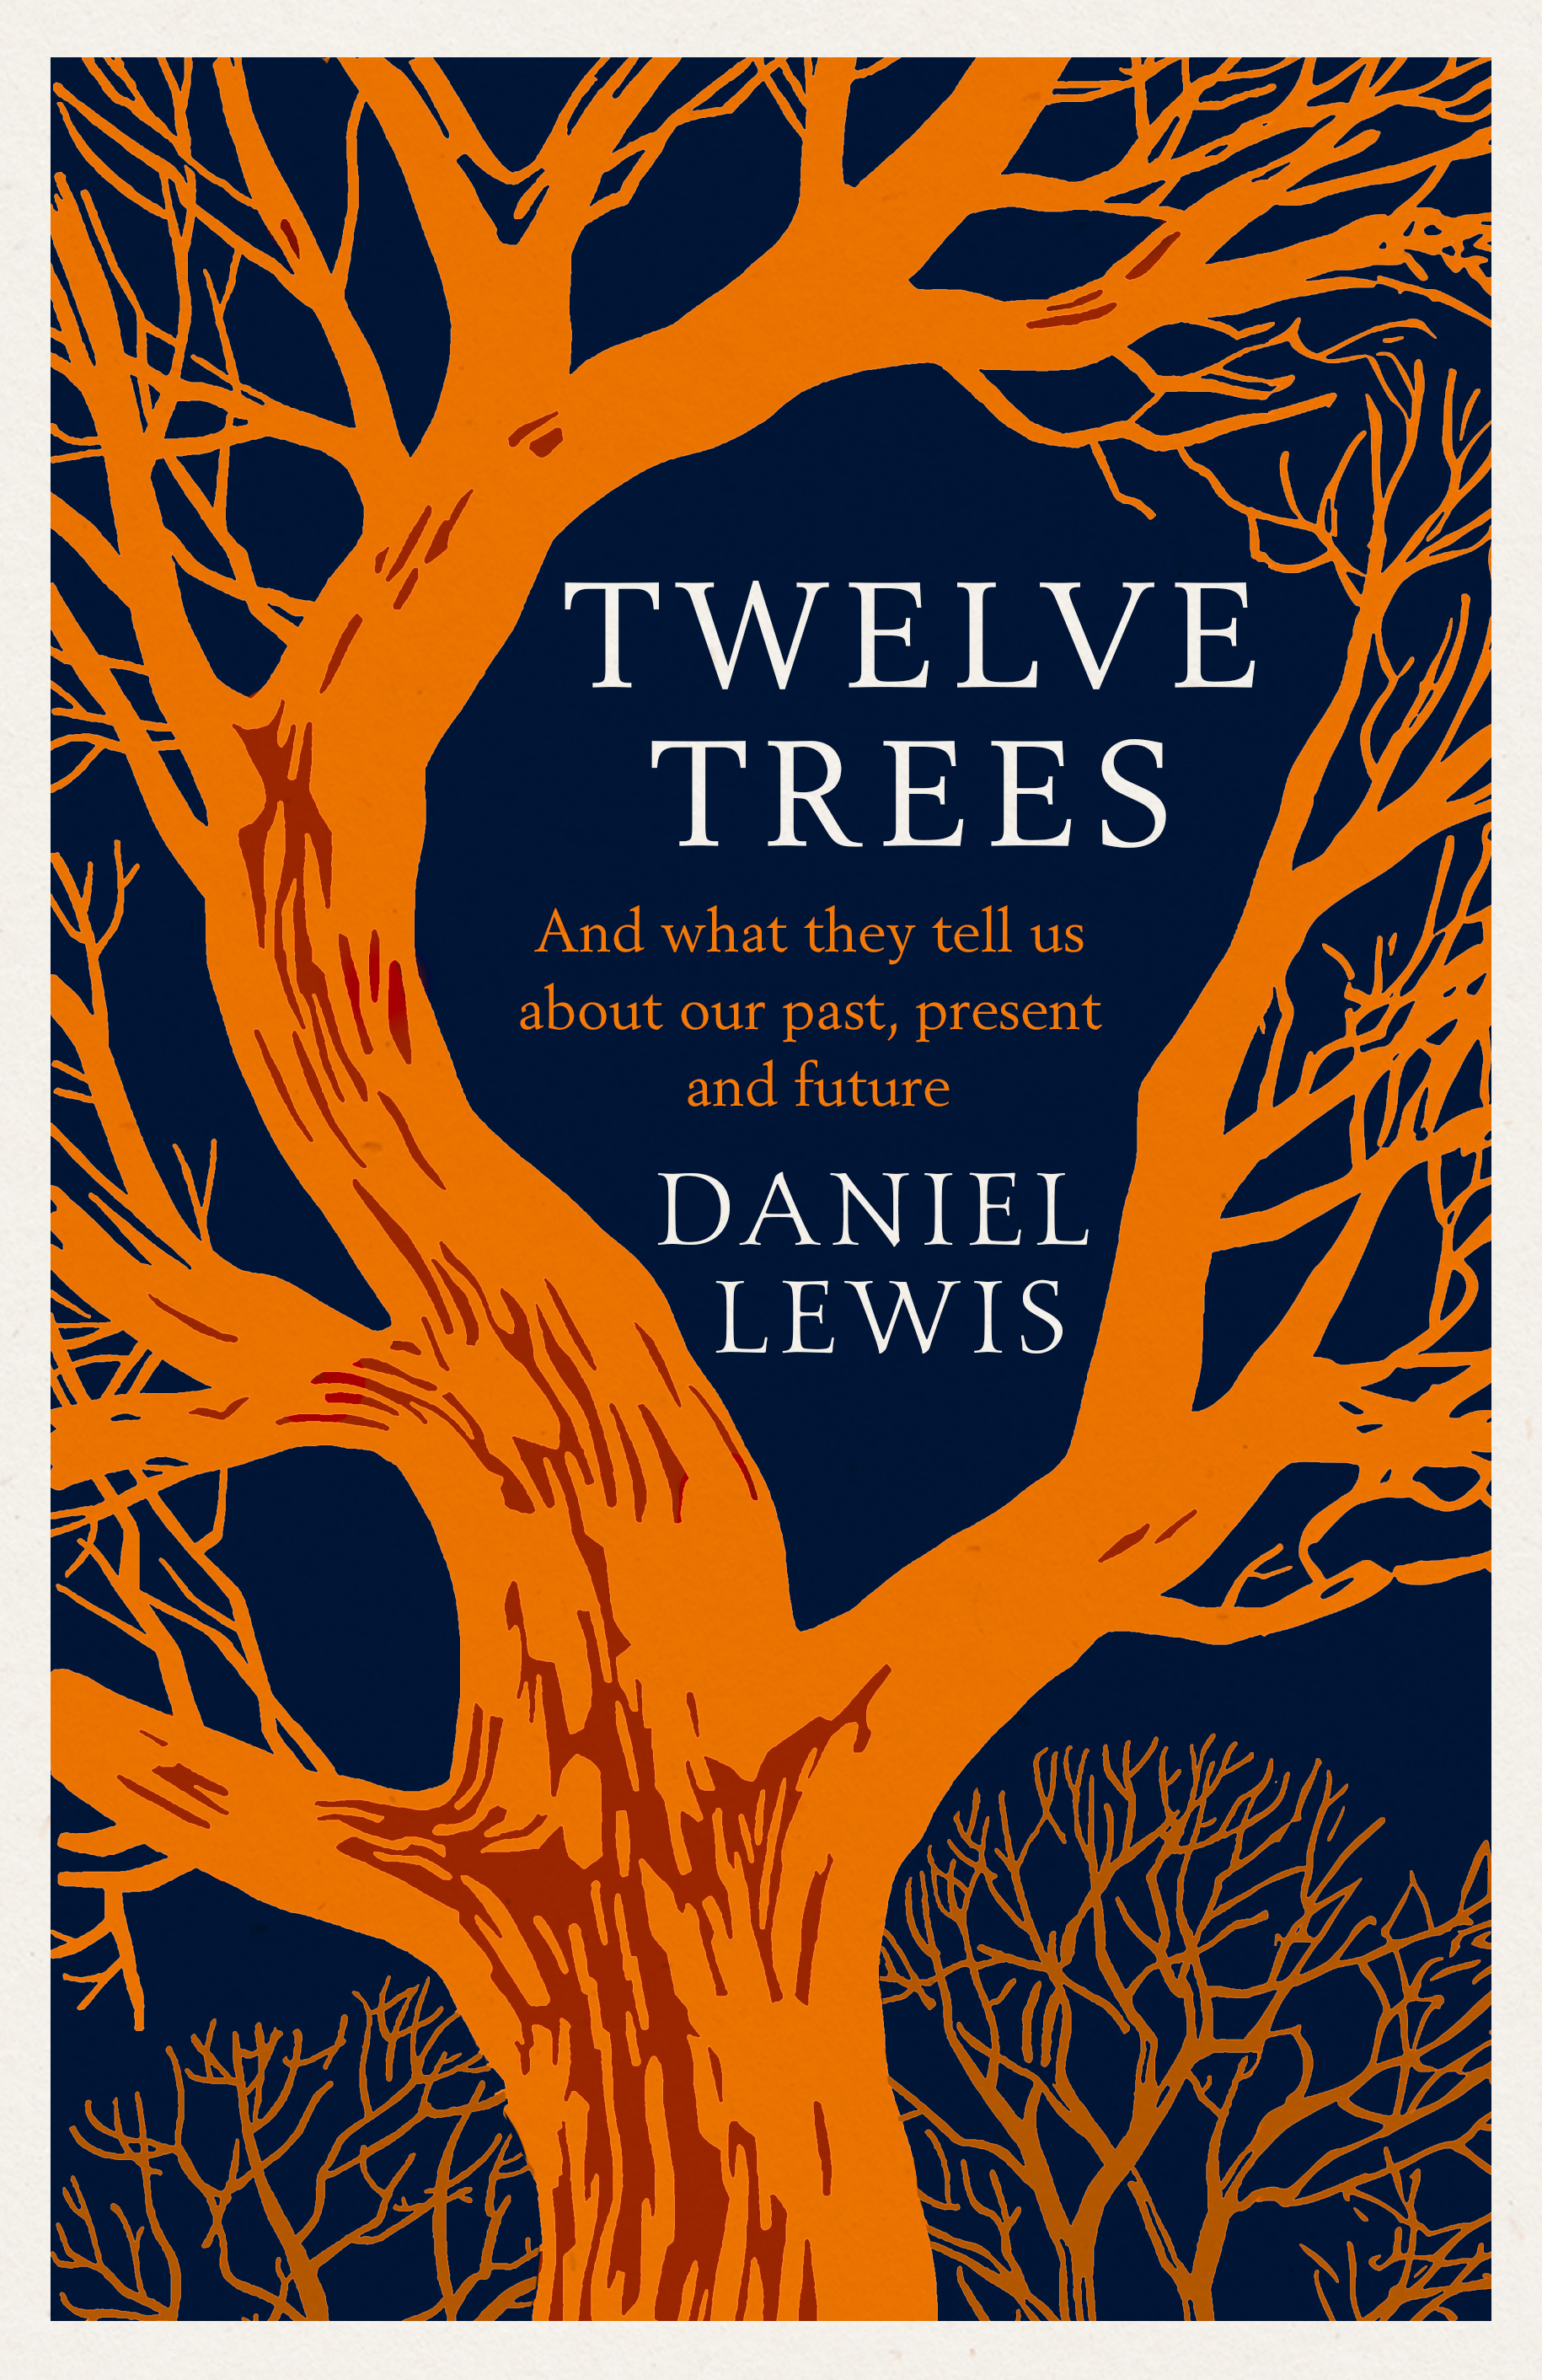 Twelve Trees: The Deep Roots of Our Future by Daniel Lewis